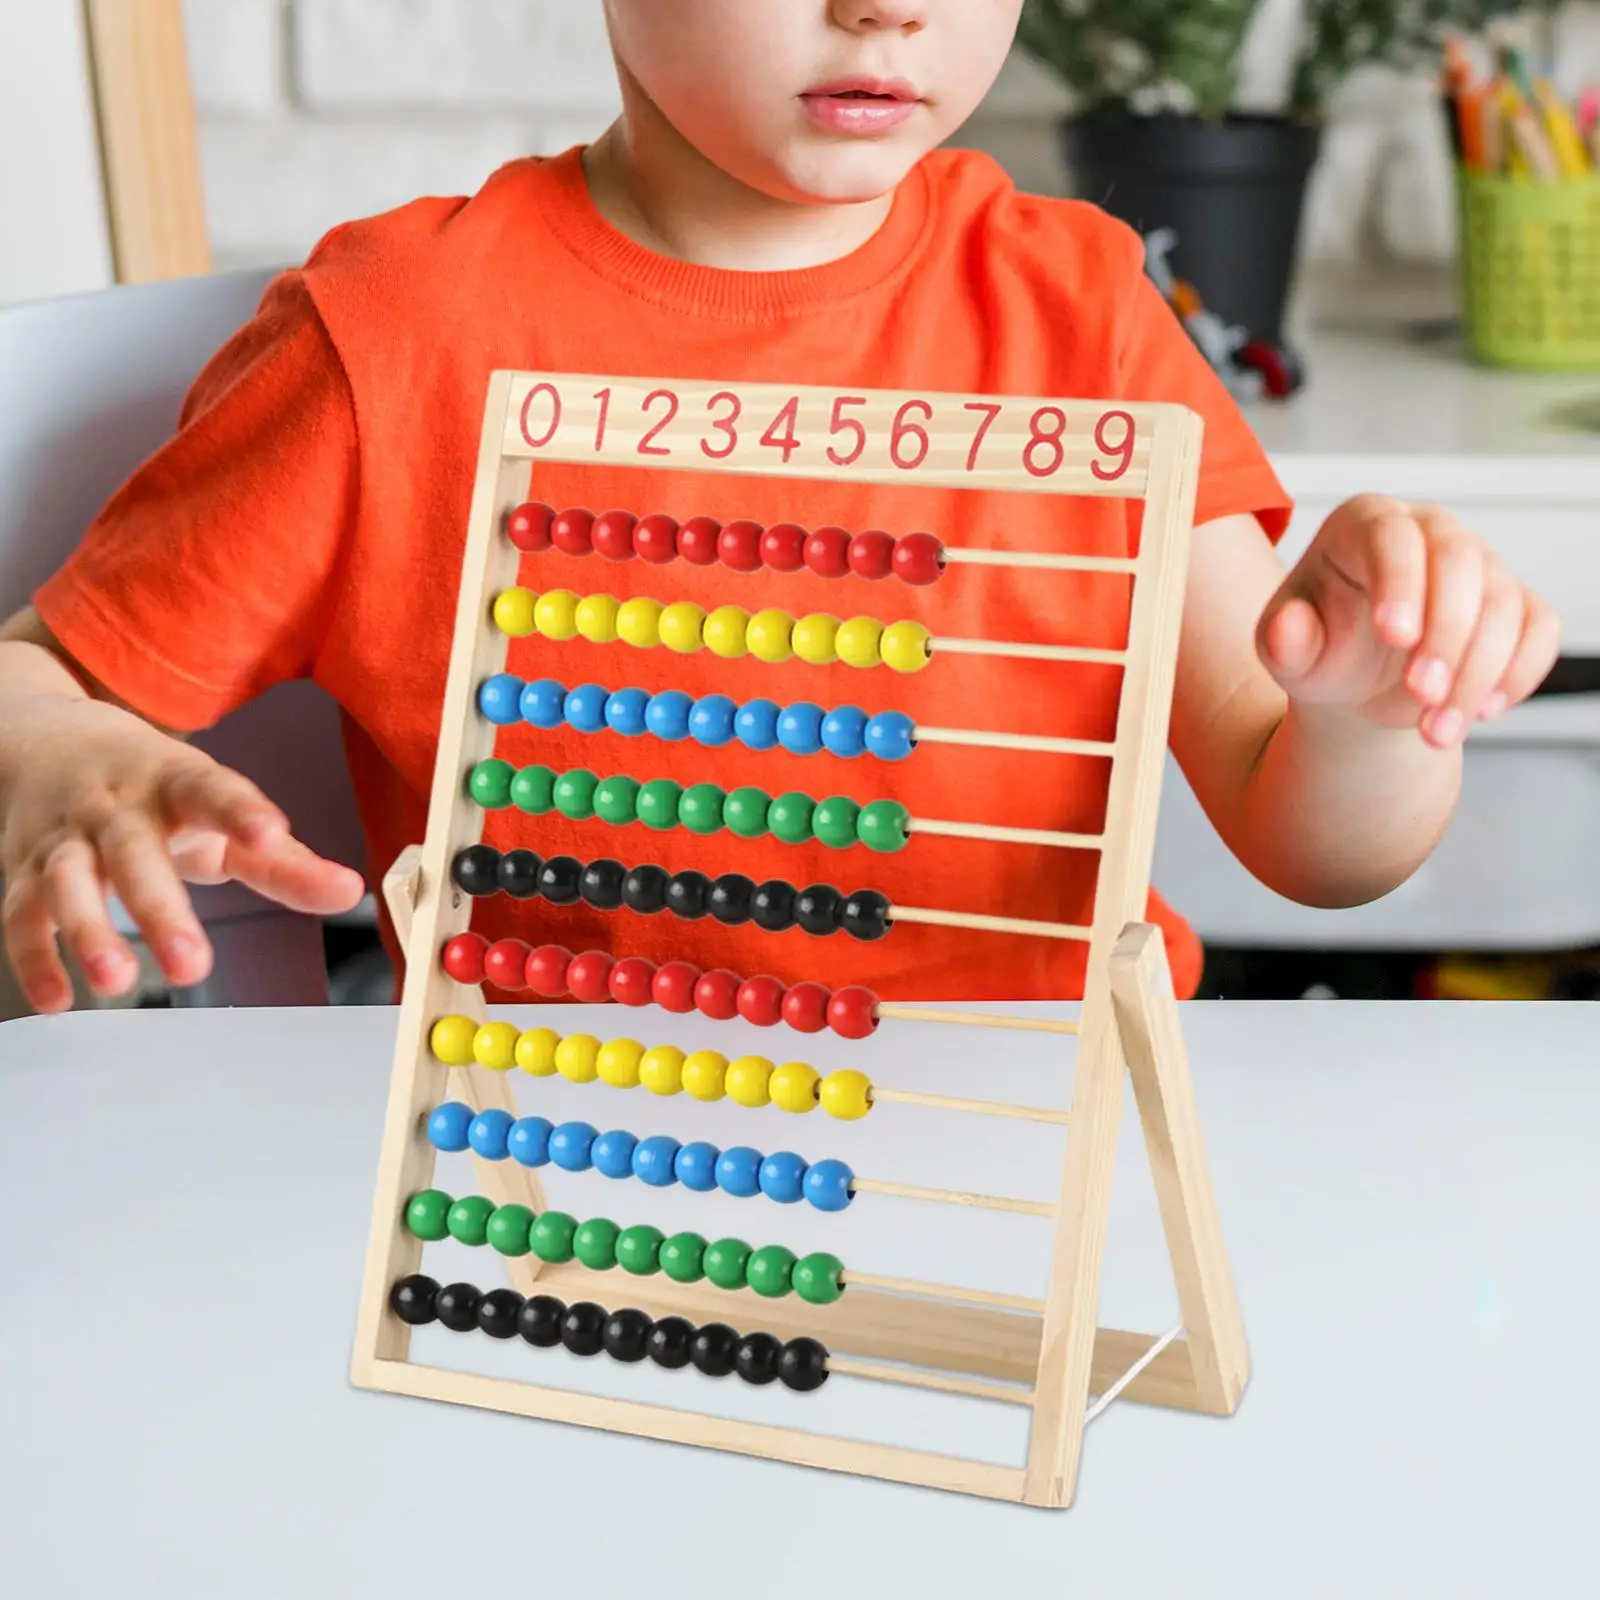 Add Subtract Abacus Math Games Learn Math Counting Abacus Toy Ten Frame Set for Kindergarten Toddlers Boys Girls Preschool Kids